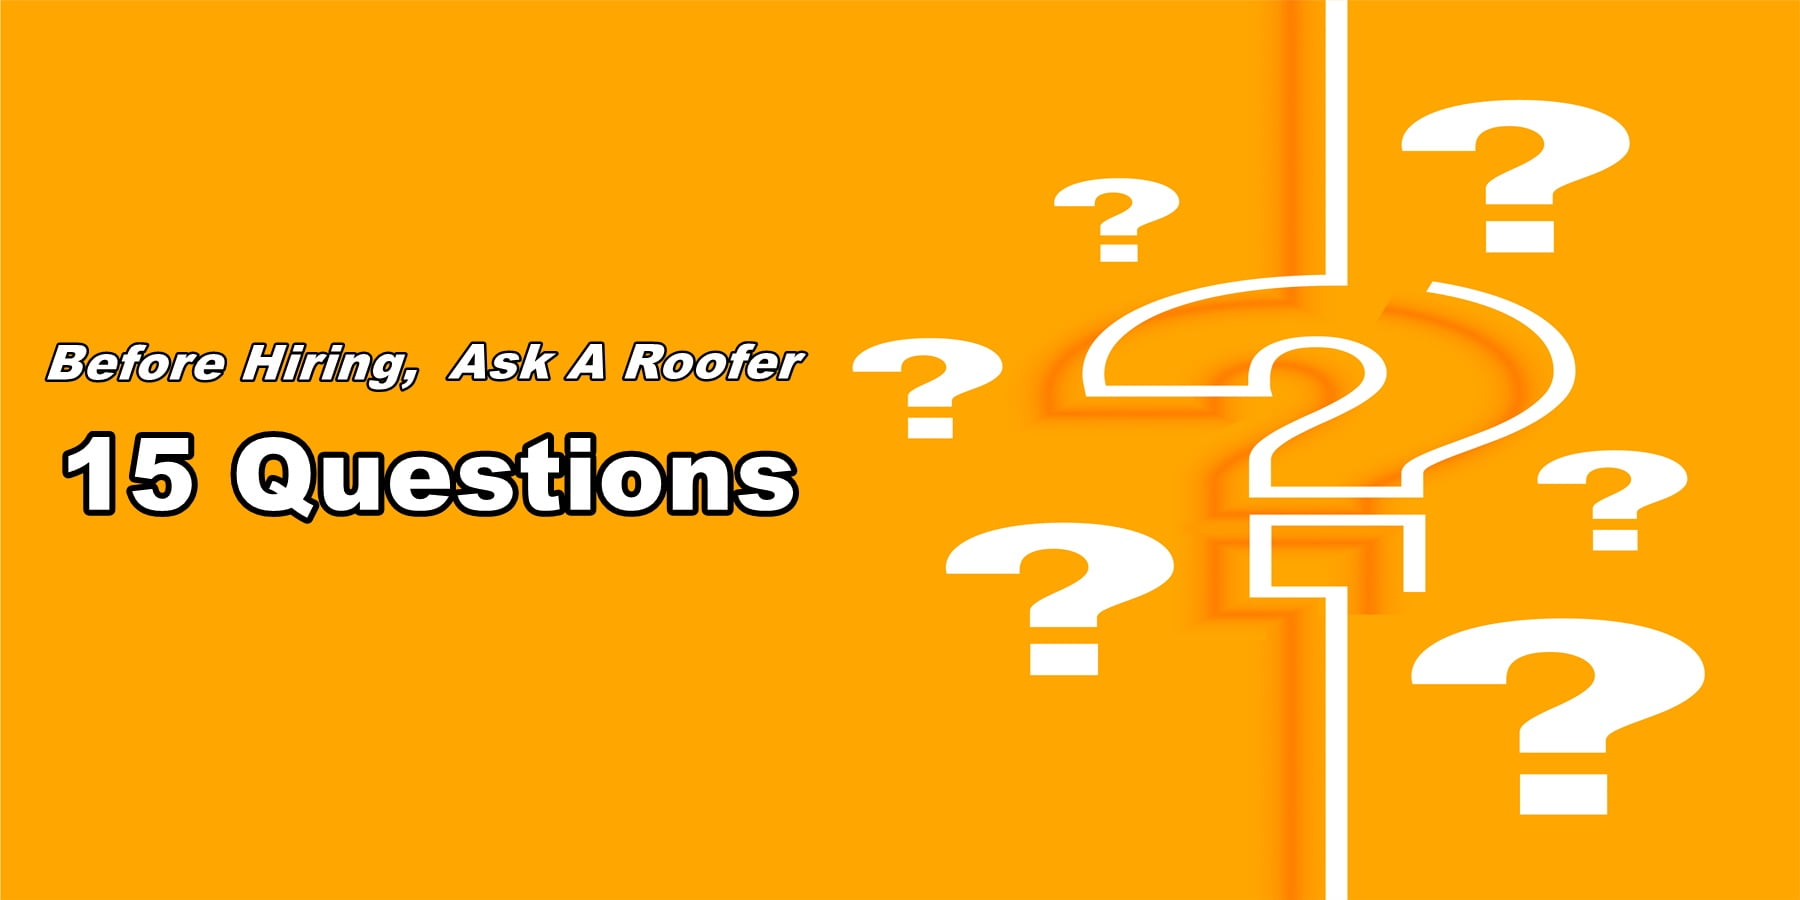 15 Questions to Ask a Roofer before Hiring